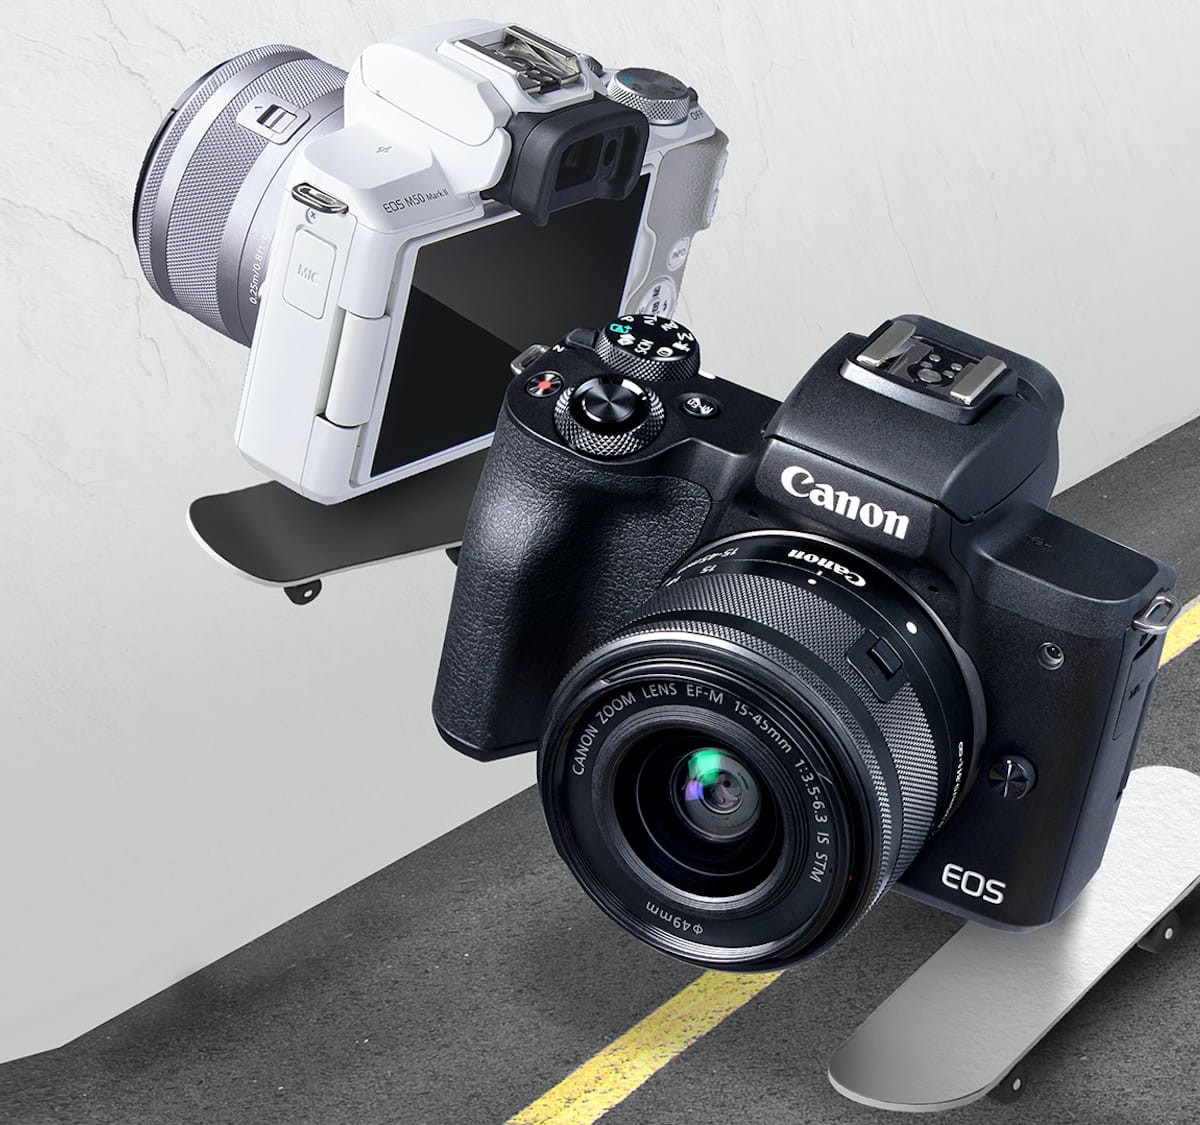 Canon EOS M50 Mark II interchangeable lens camera has video and streaming abilities